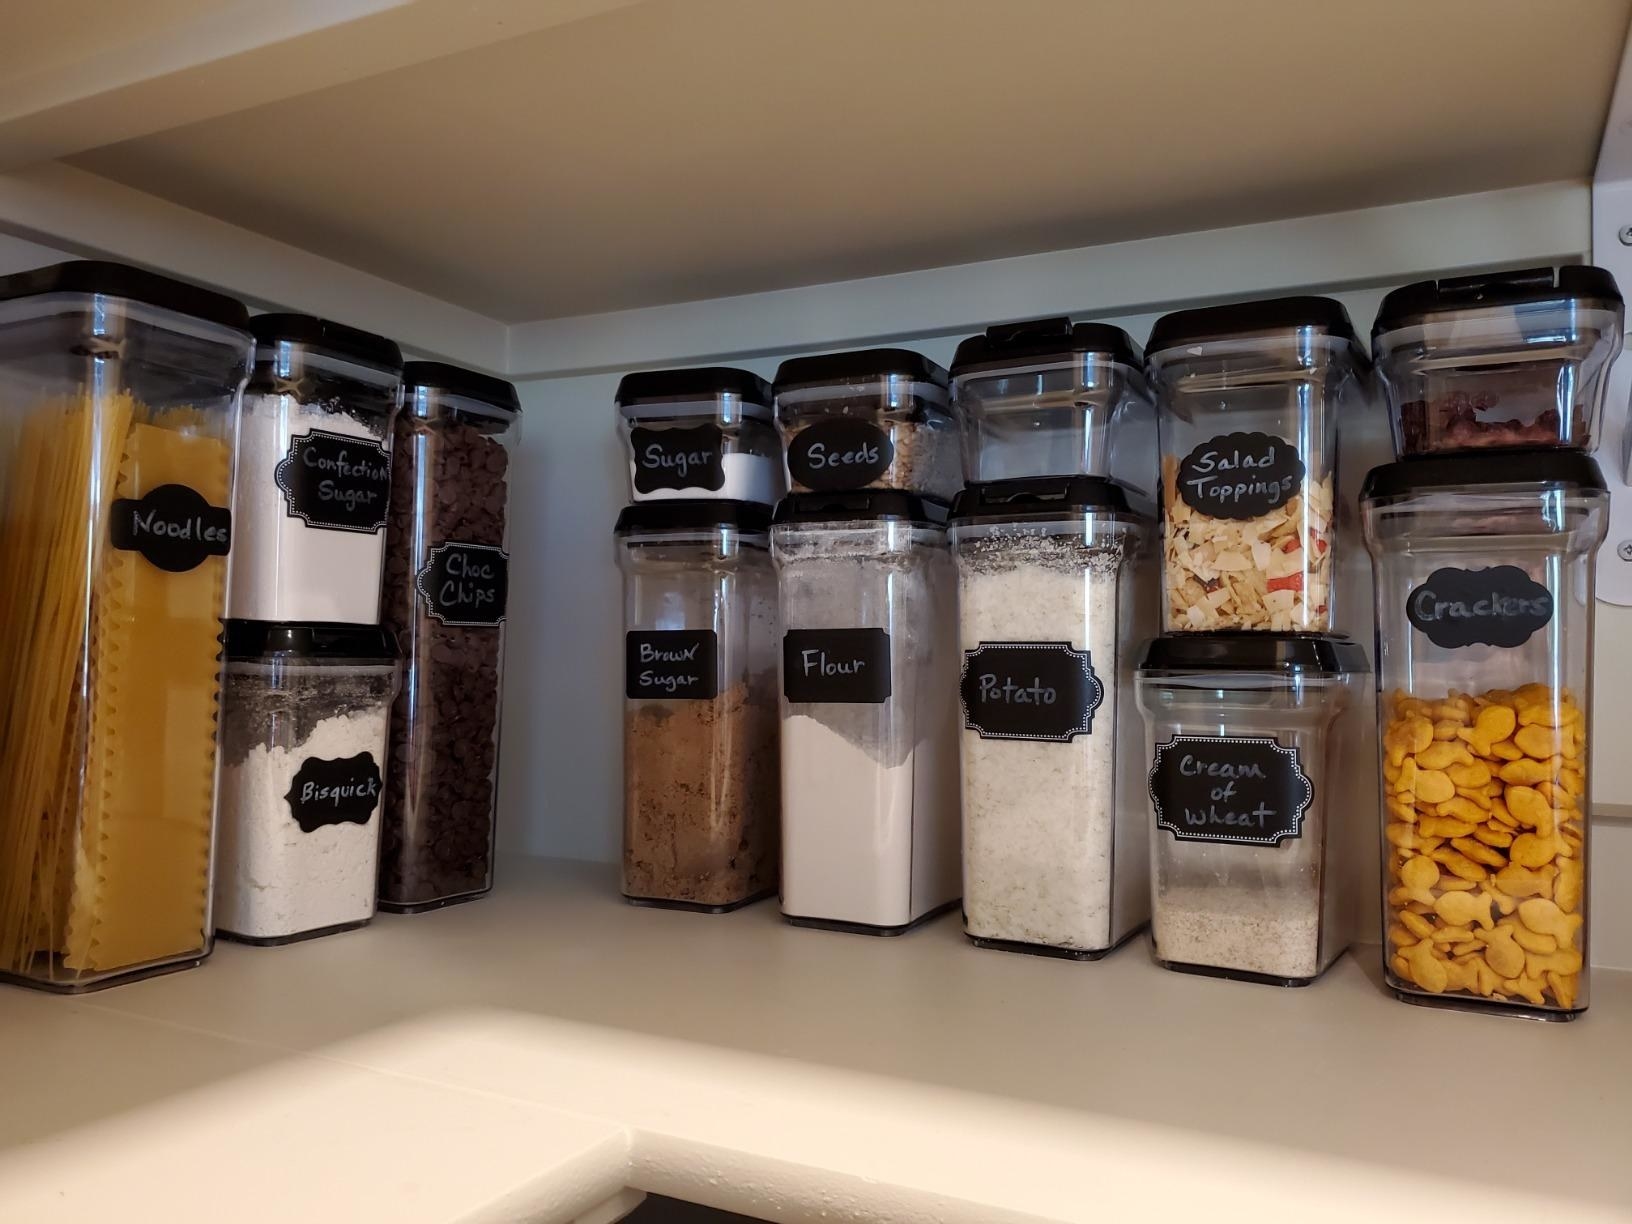 A reviewer photo of the containers, which has snap-closed lids and erasable labels